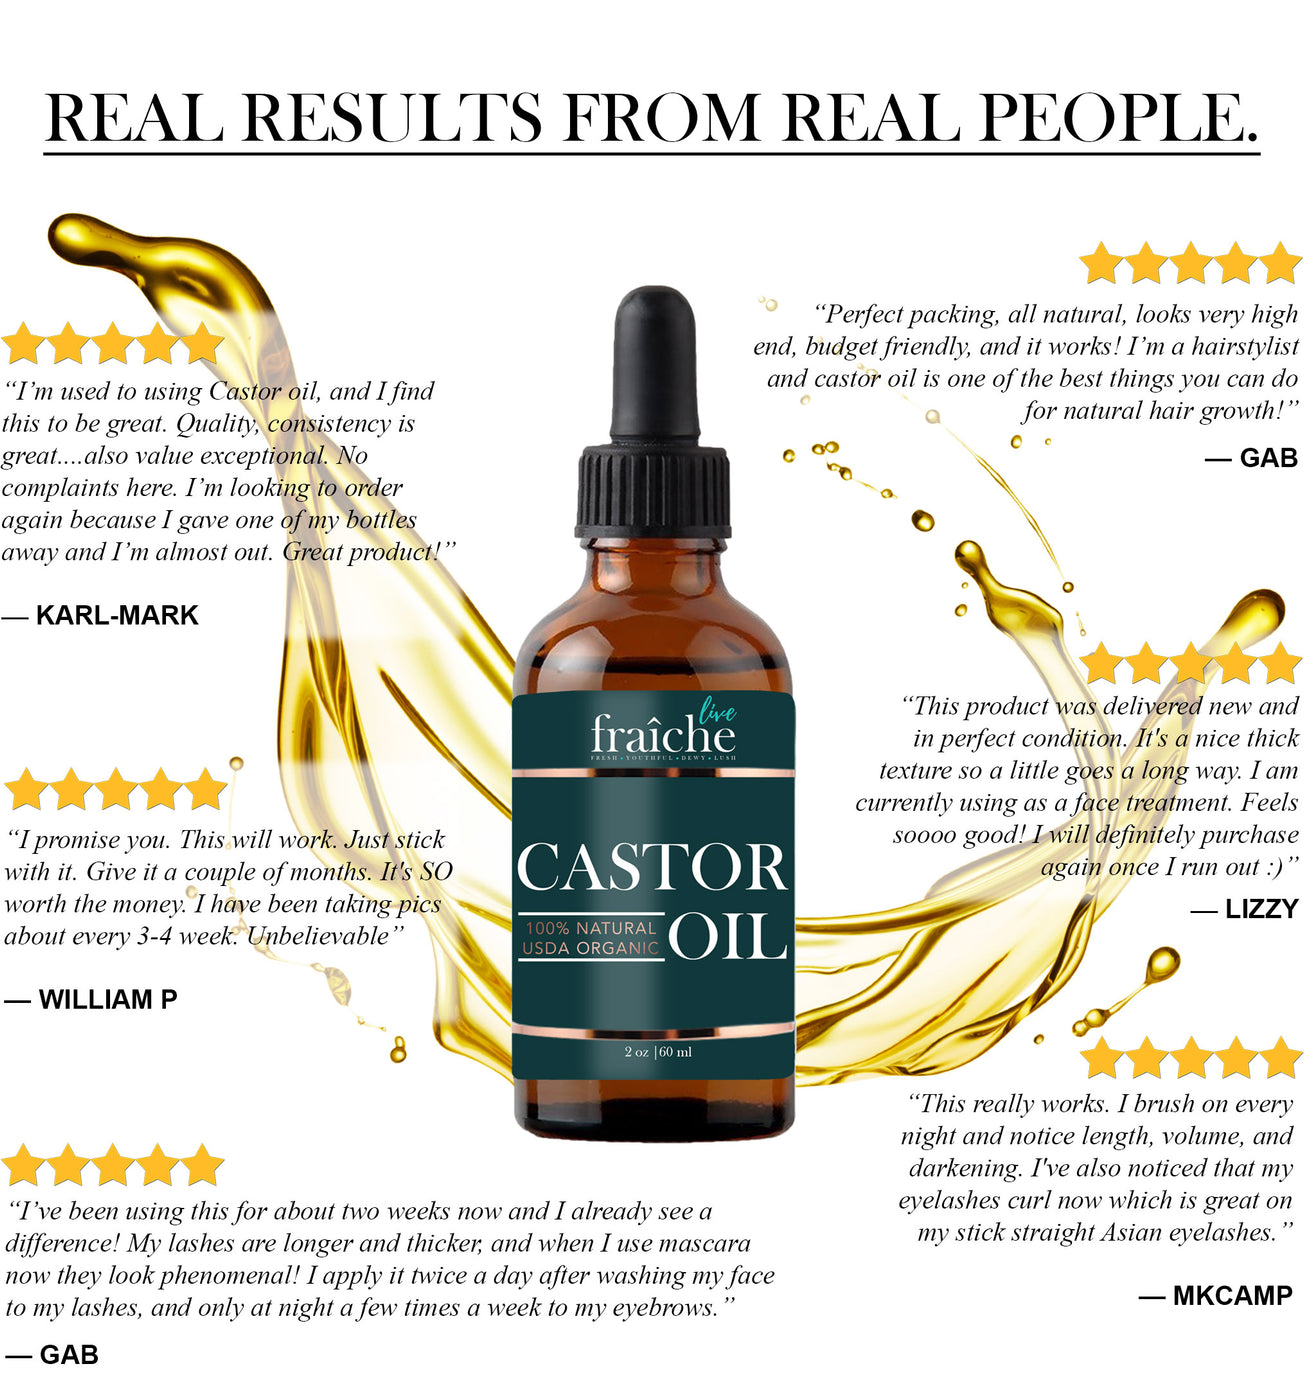 Organic Castor Oil for Hair Skin and Nails (2oz)